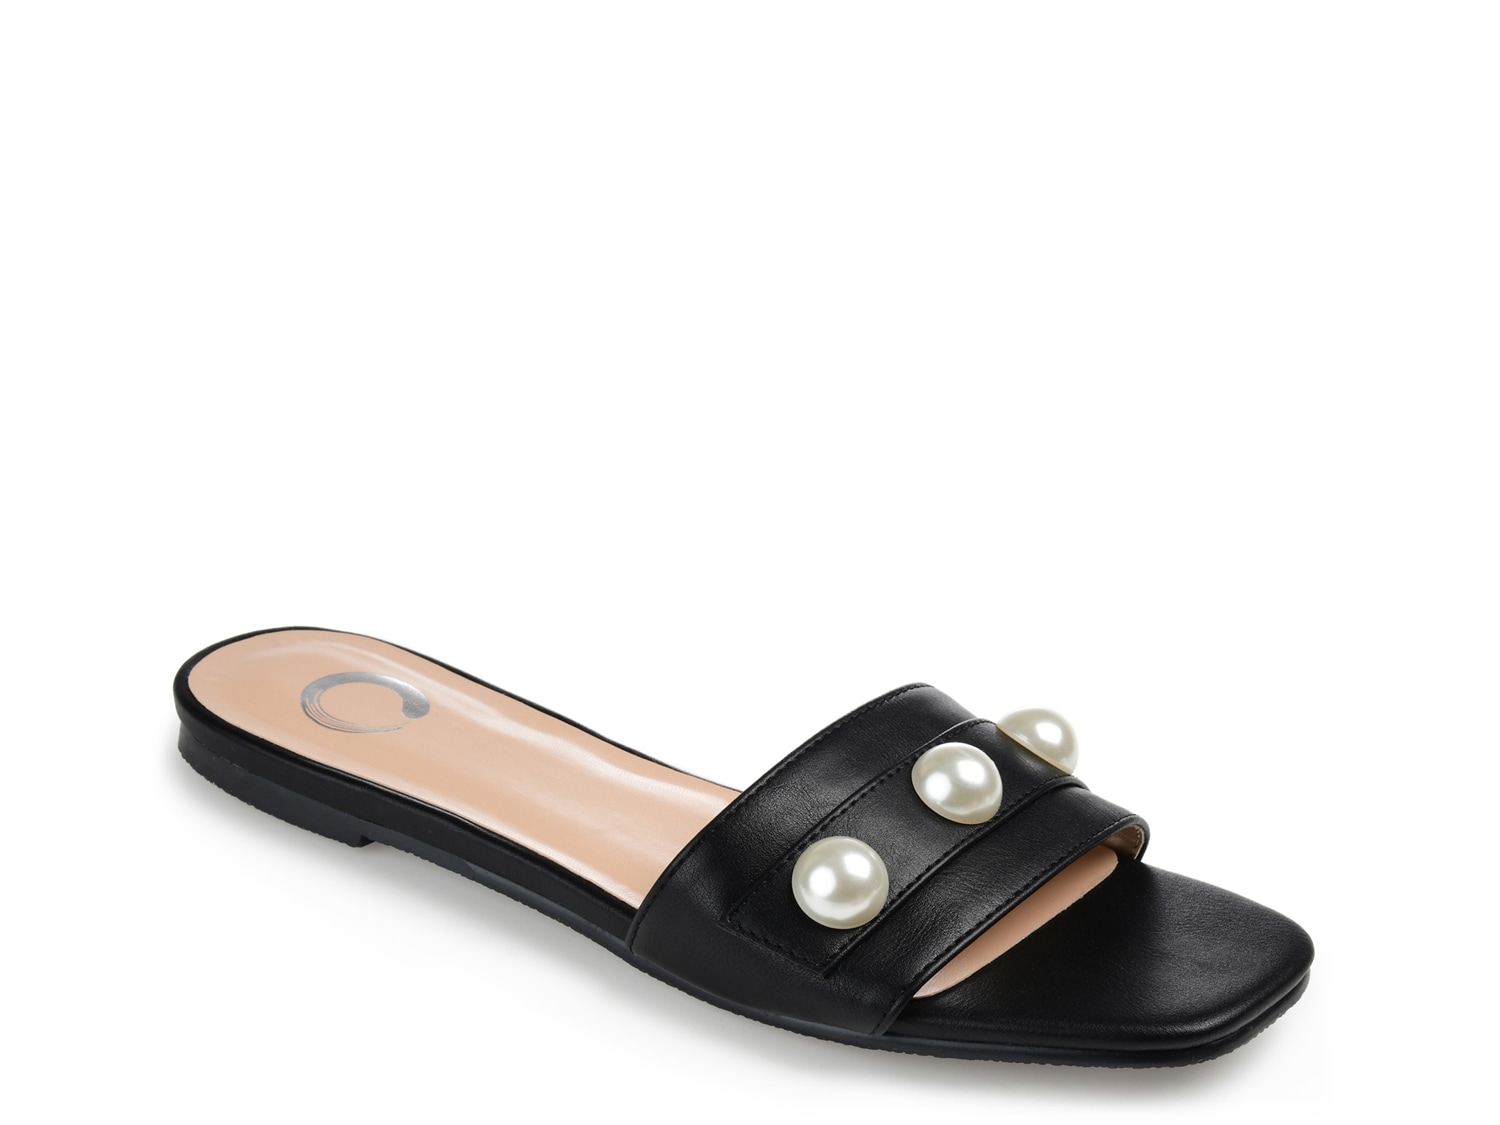 Journee Collection Leonie Slide Sandal - Free Shipping | DSW